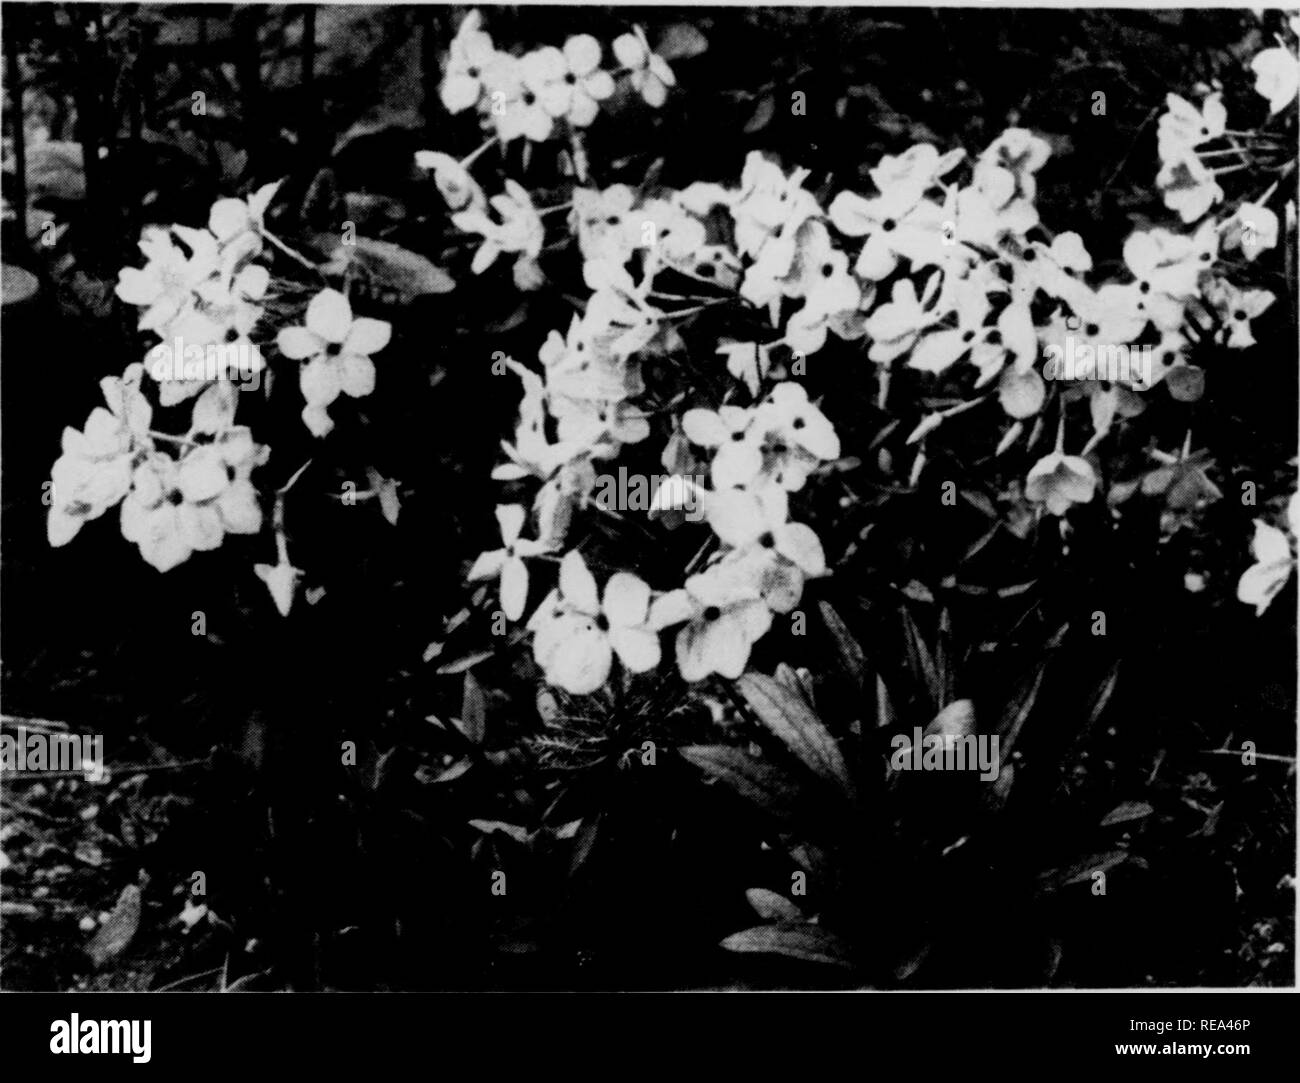 . Contributions from the Botanical Laboratory, vol. 9. Botany; Botany. 20 PROCEEDINGS OF THE ]&gt;ART0N1A, No. 13 Plate 4 m m 8. Phlox stolonifera Sims. Creeping Phlox. Plate 4. History.â^0 far as recorded this Phlox was first observed, in Georgia, by the horticultural collector John Eraser in 1786, and living material sent by him to England in 1801 formed the basis of the specific description by Sims.^ It was also found about the same time by Michaux^ and named P. reptans; this has been widely used, but since Sims's name has a yearns priority, Michaux's must be relegated to synonymy. Subse- q Stock Photo